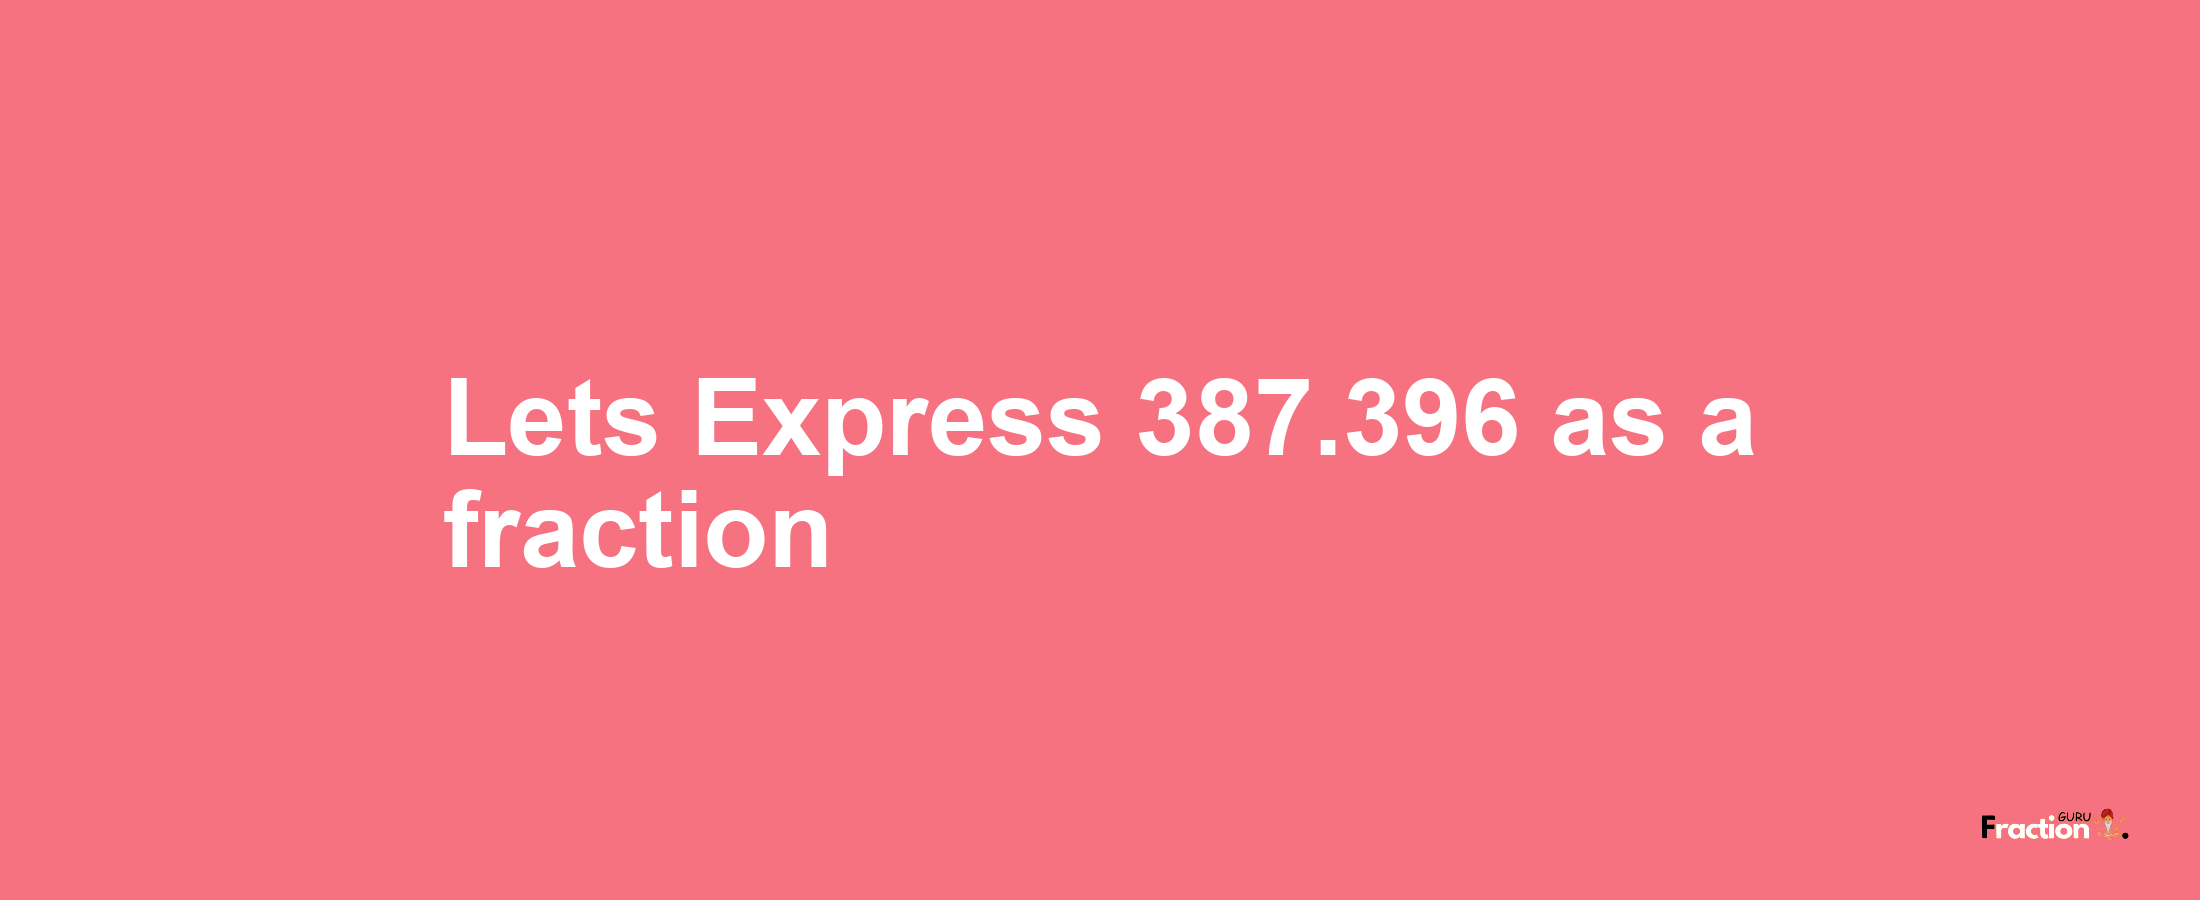 Lets Express 387.396 as afraction